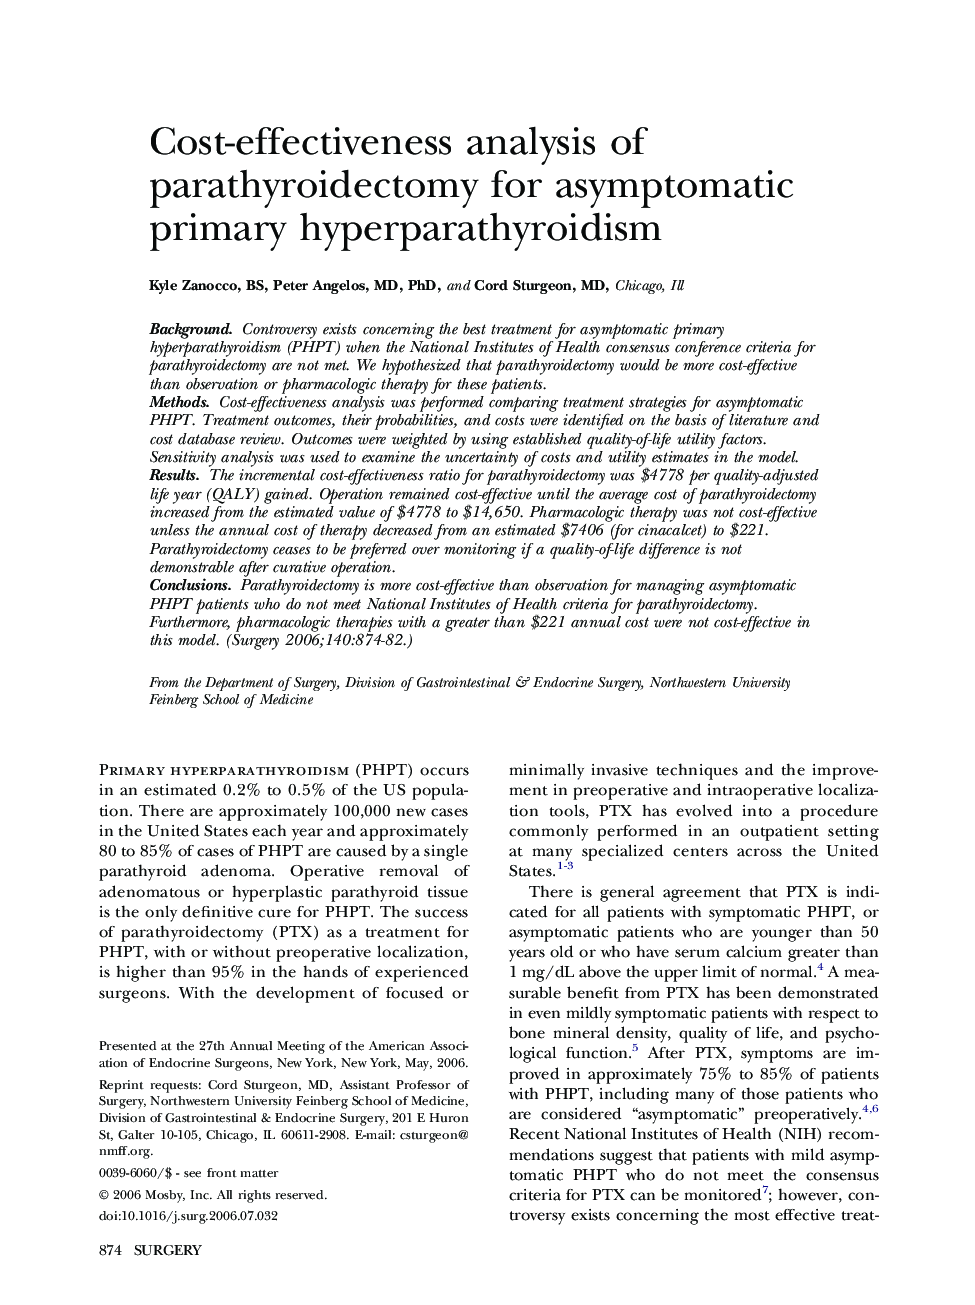 Cost-effectiveness analysis of parathyroidectomy for asymptomatic primary hyperparathyroidism